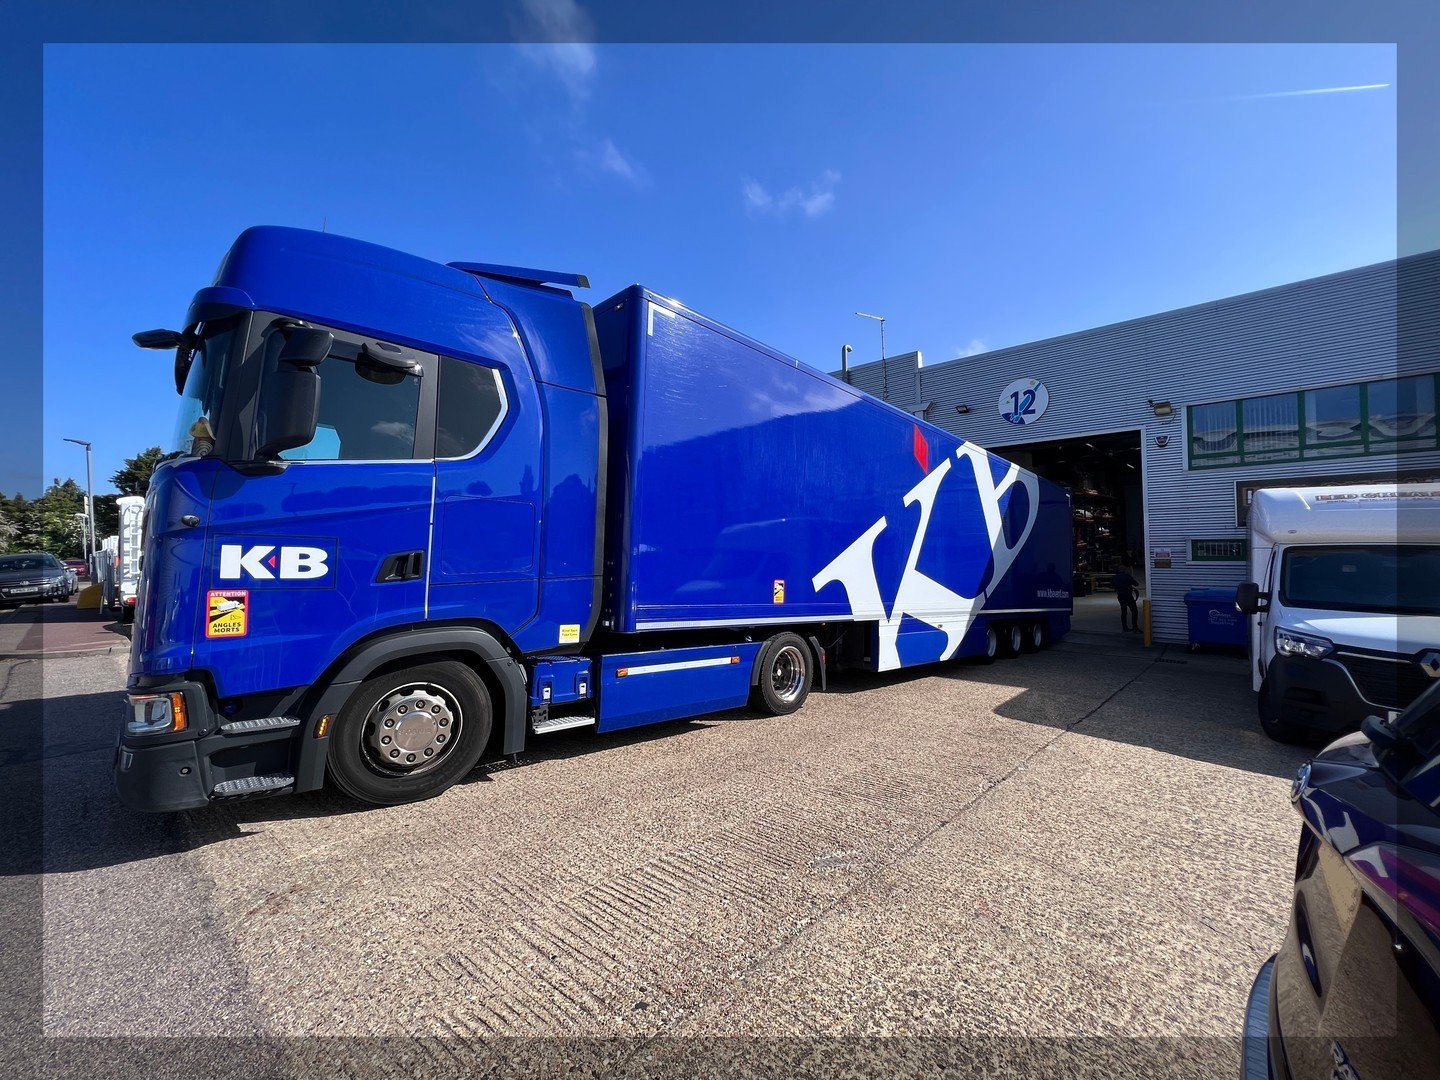 We love Lorry pictures! 😍
Now LC HQ is a little bigger, visits from large lorries are not a problem! 
The Team had an early start this morning to see the latest touring show leave LC HQ on this lovely KB Event 40ft. The Driver Nigel was a lovely cha